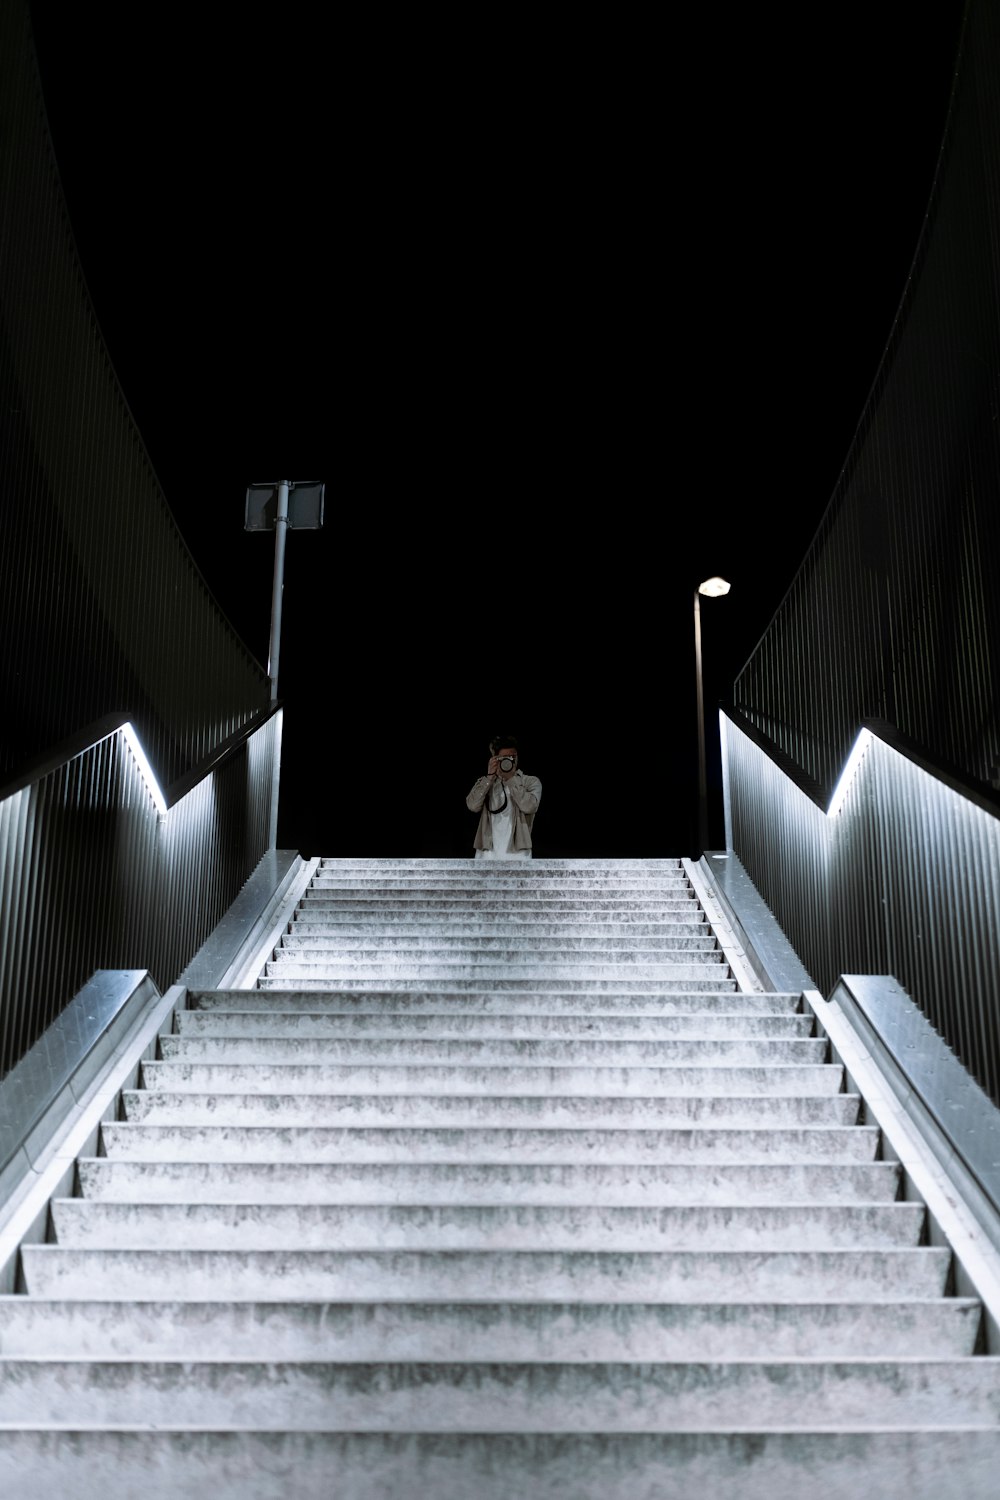 a person walking up a flight of stairs at night